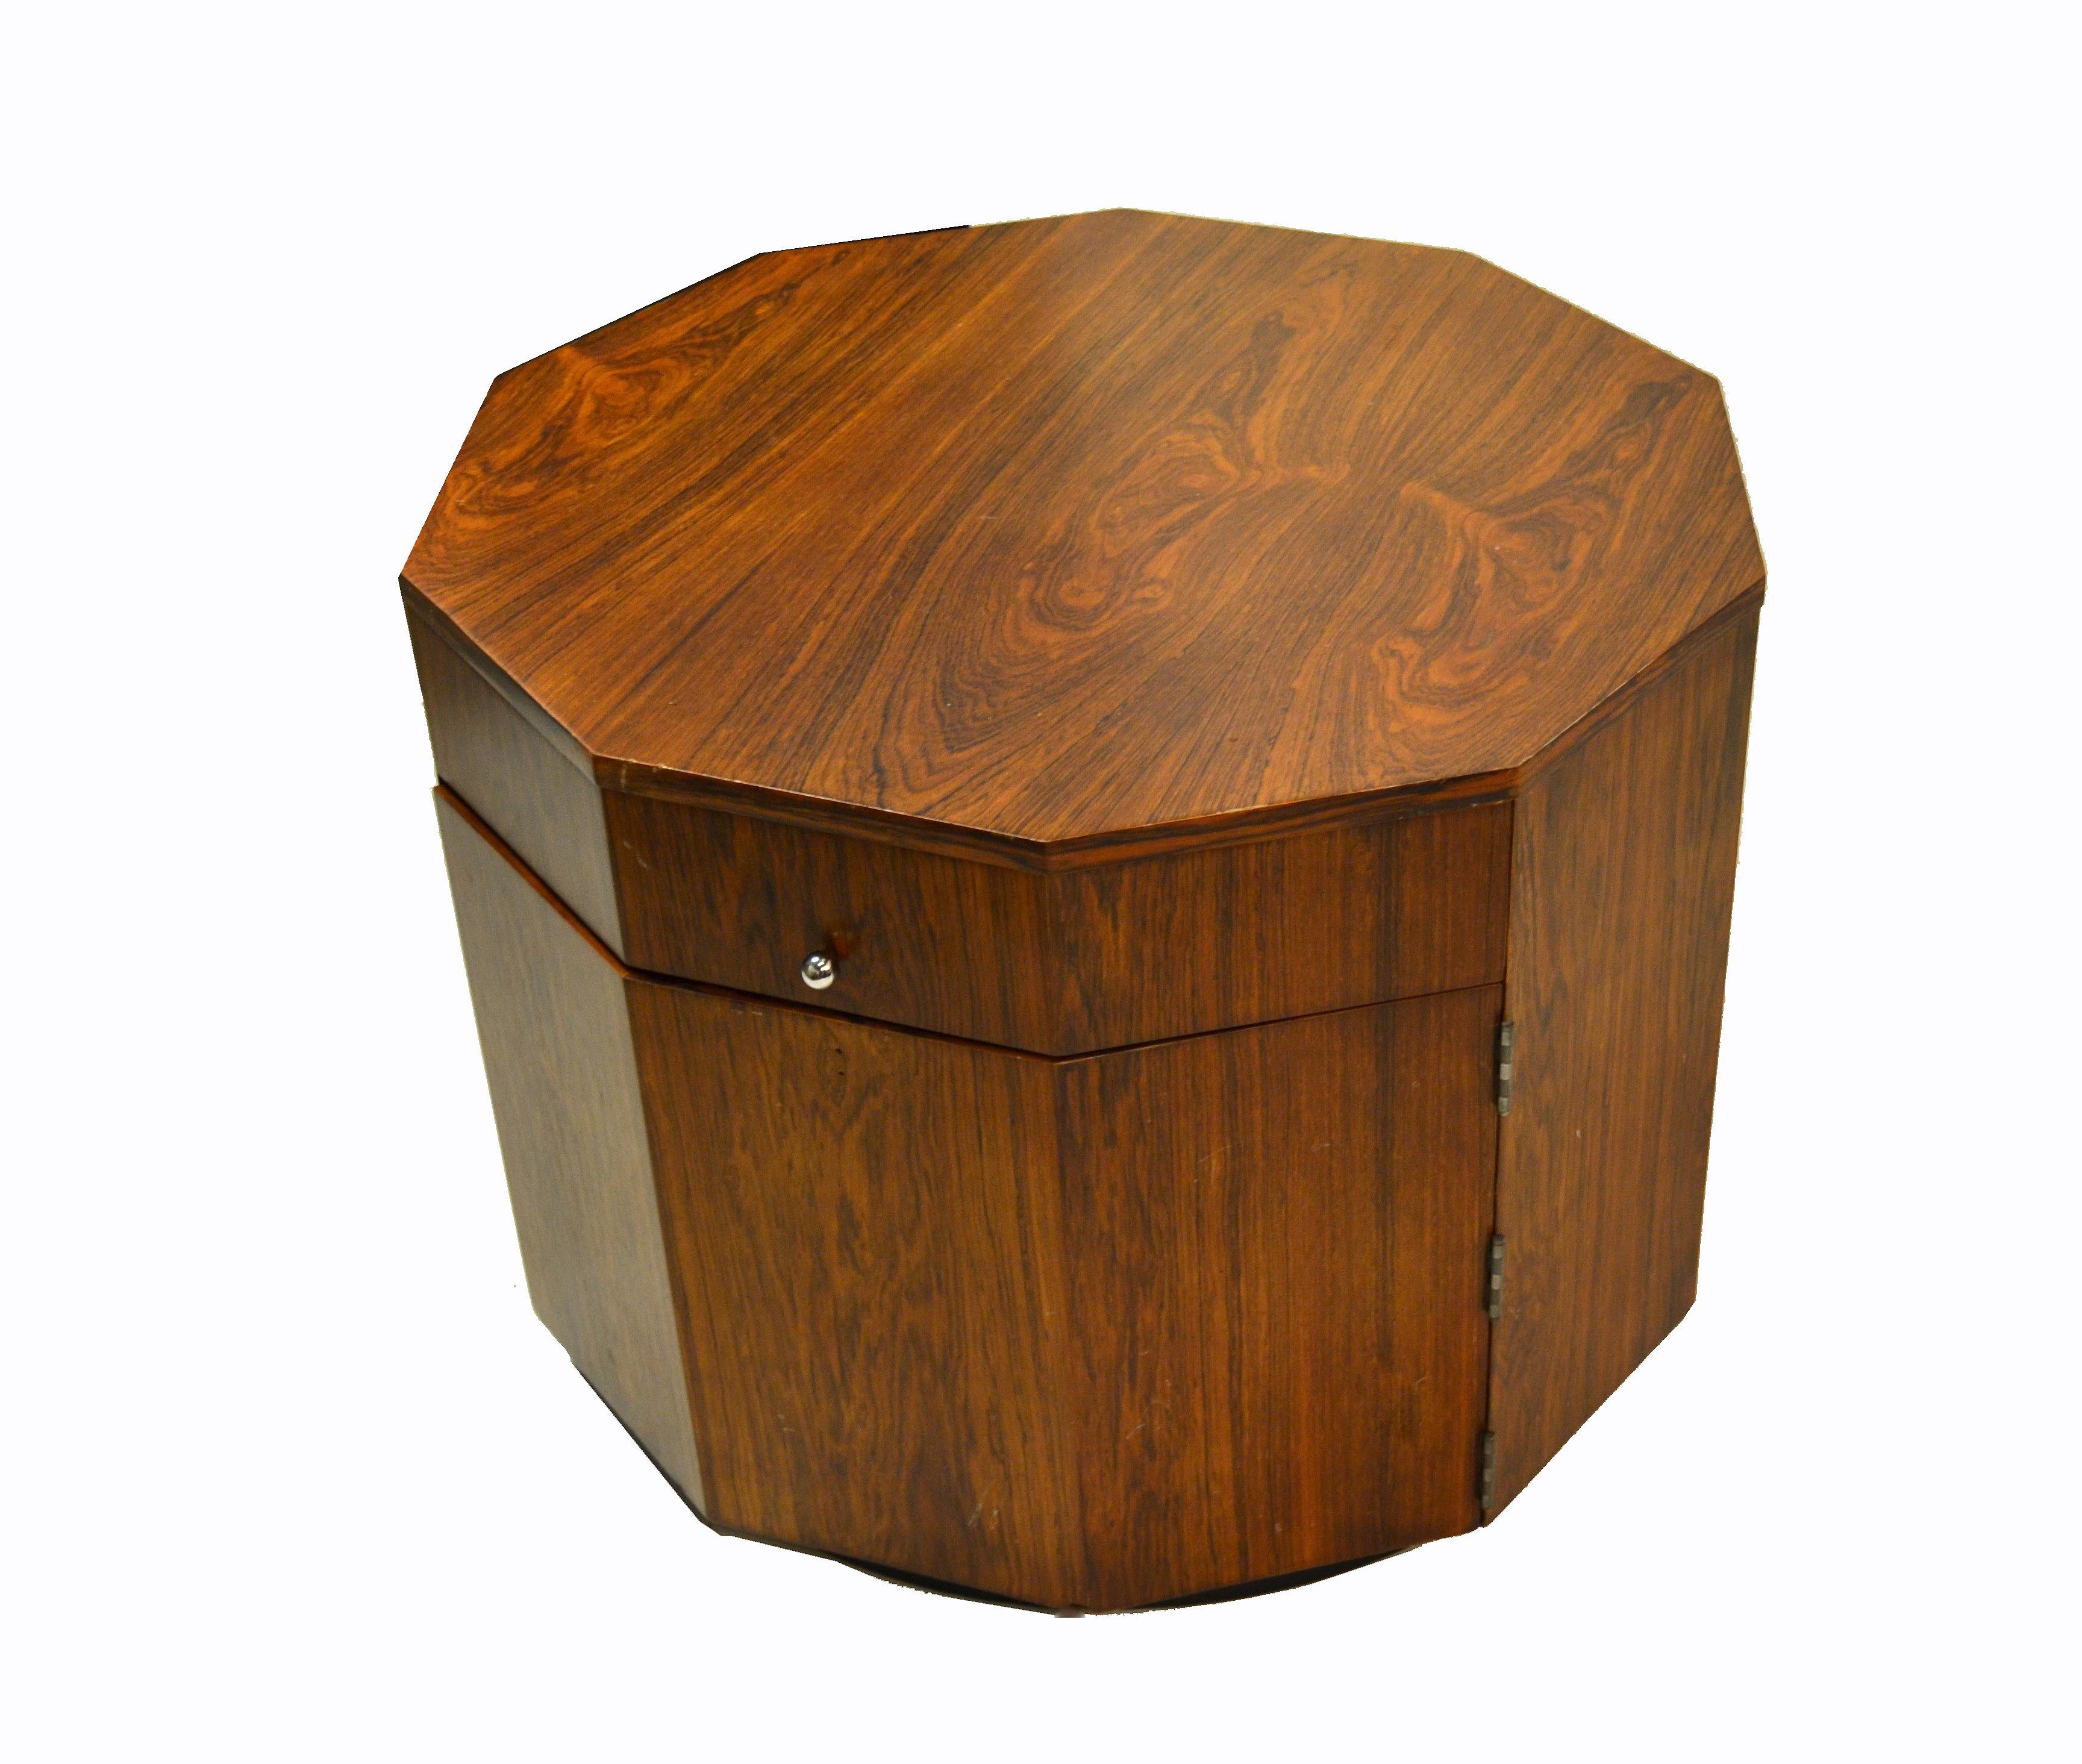 Original Harvey Probber Mid-Century Modern octagonal occasional rosewood table or cabinet.
The interior features an open storage space with one top drawer.
Chrome pulls.